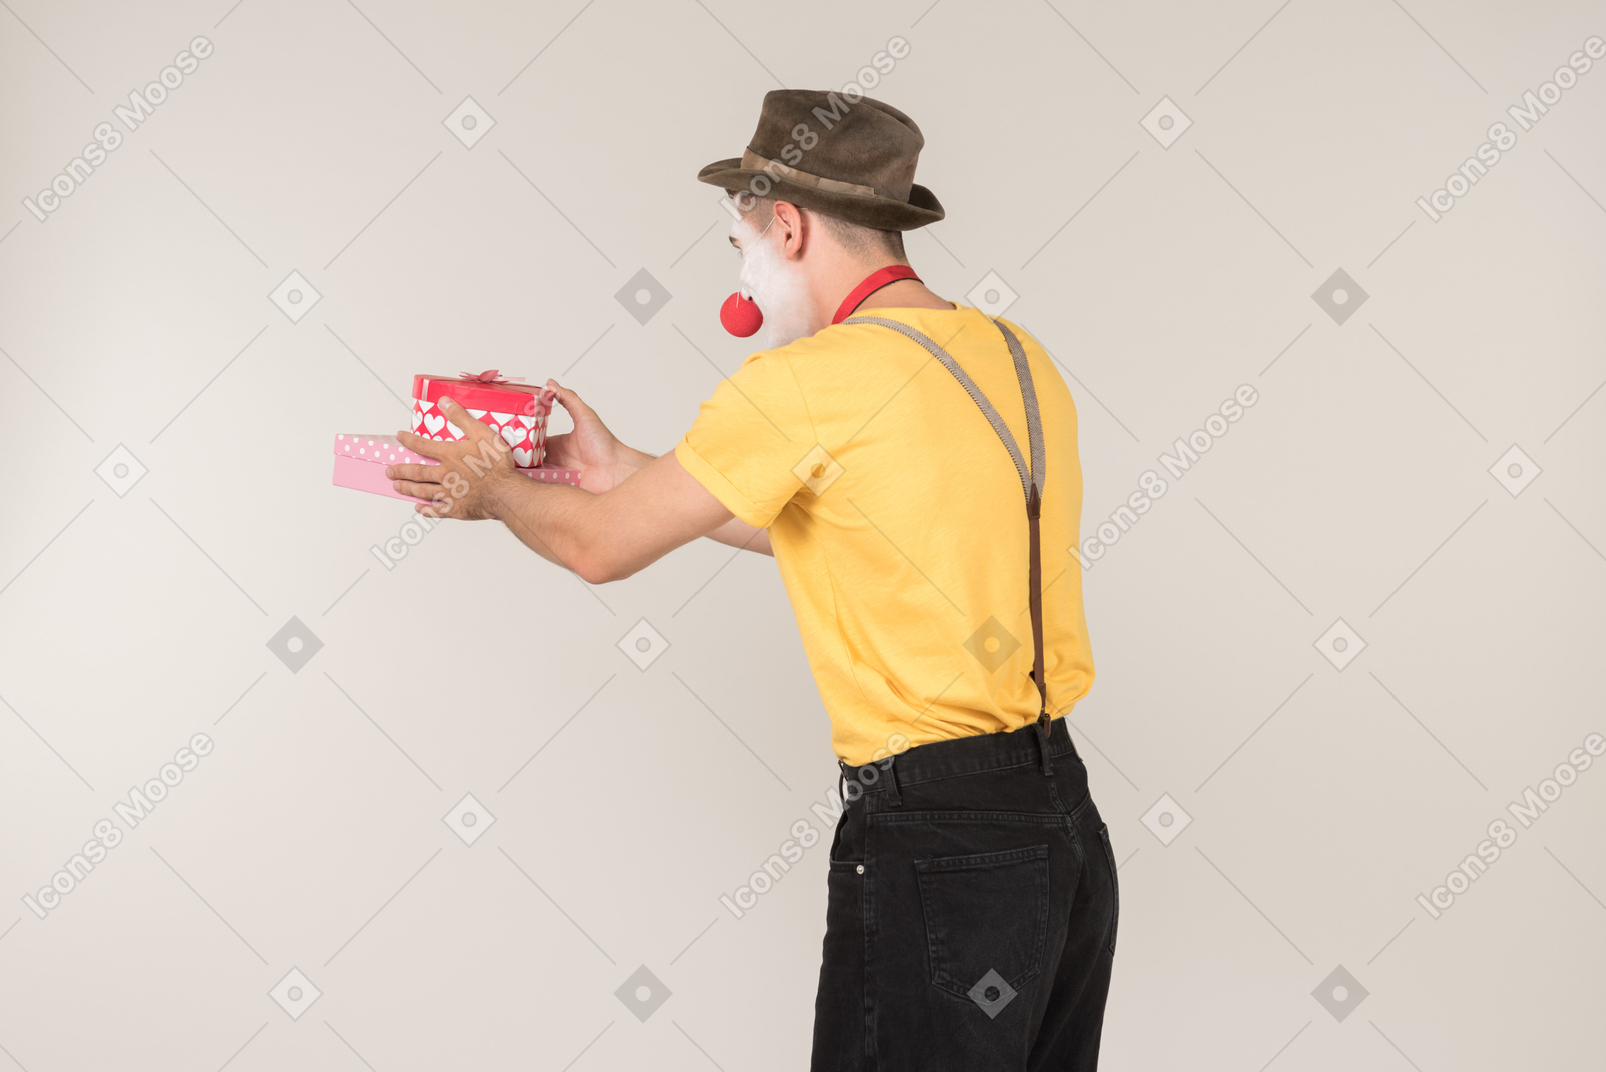 Male clown holding gift box and standing back to camera